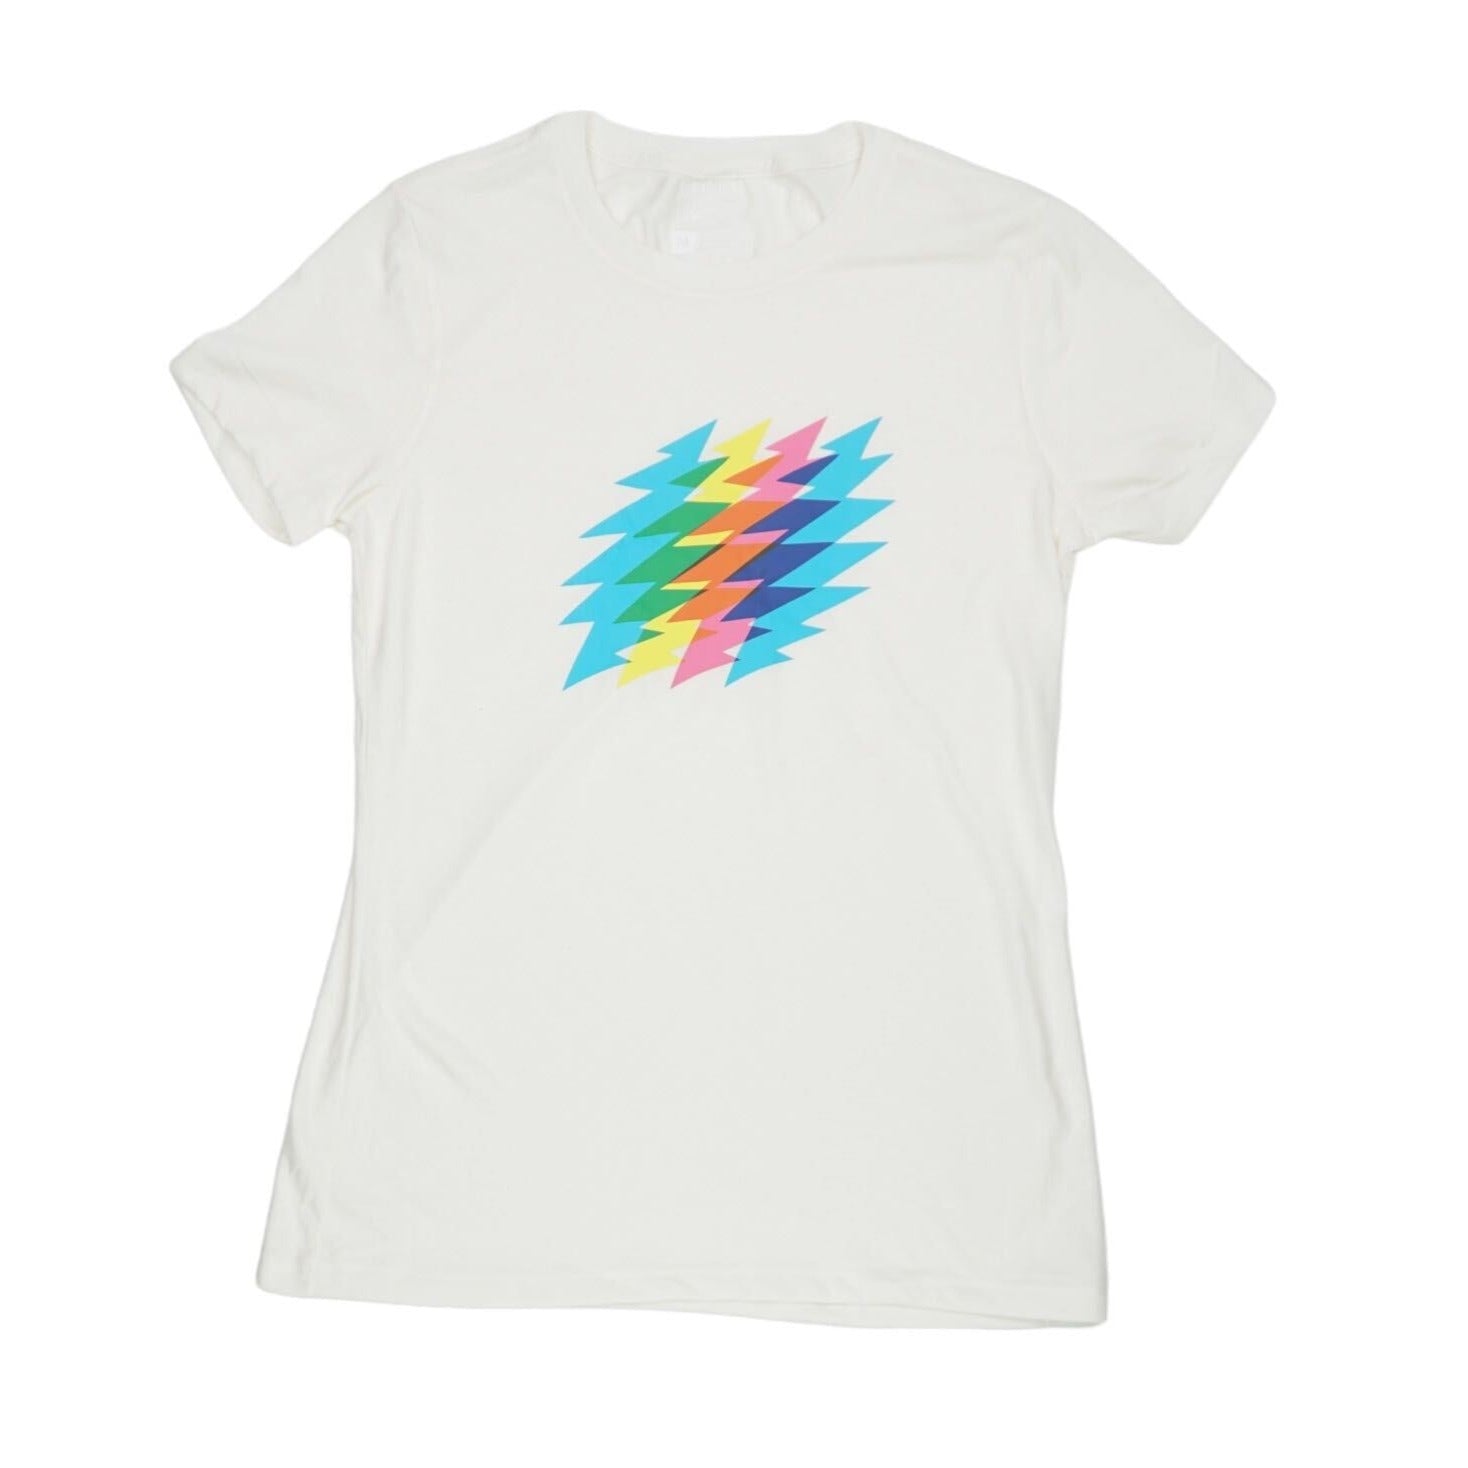 Super Soft Grateful Dead Women's Recycled 4 Tone Bolt Tee in White - Section 119